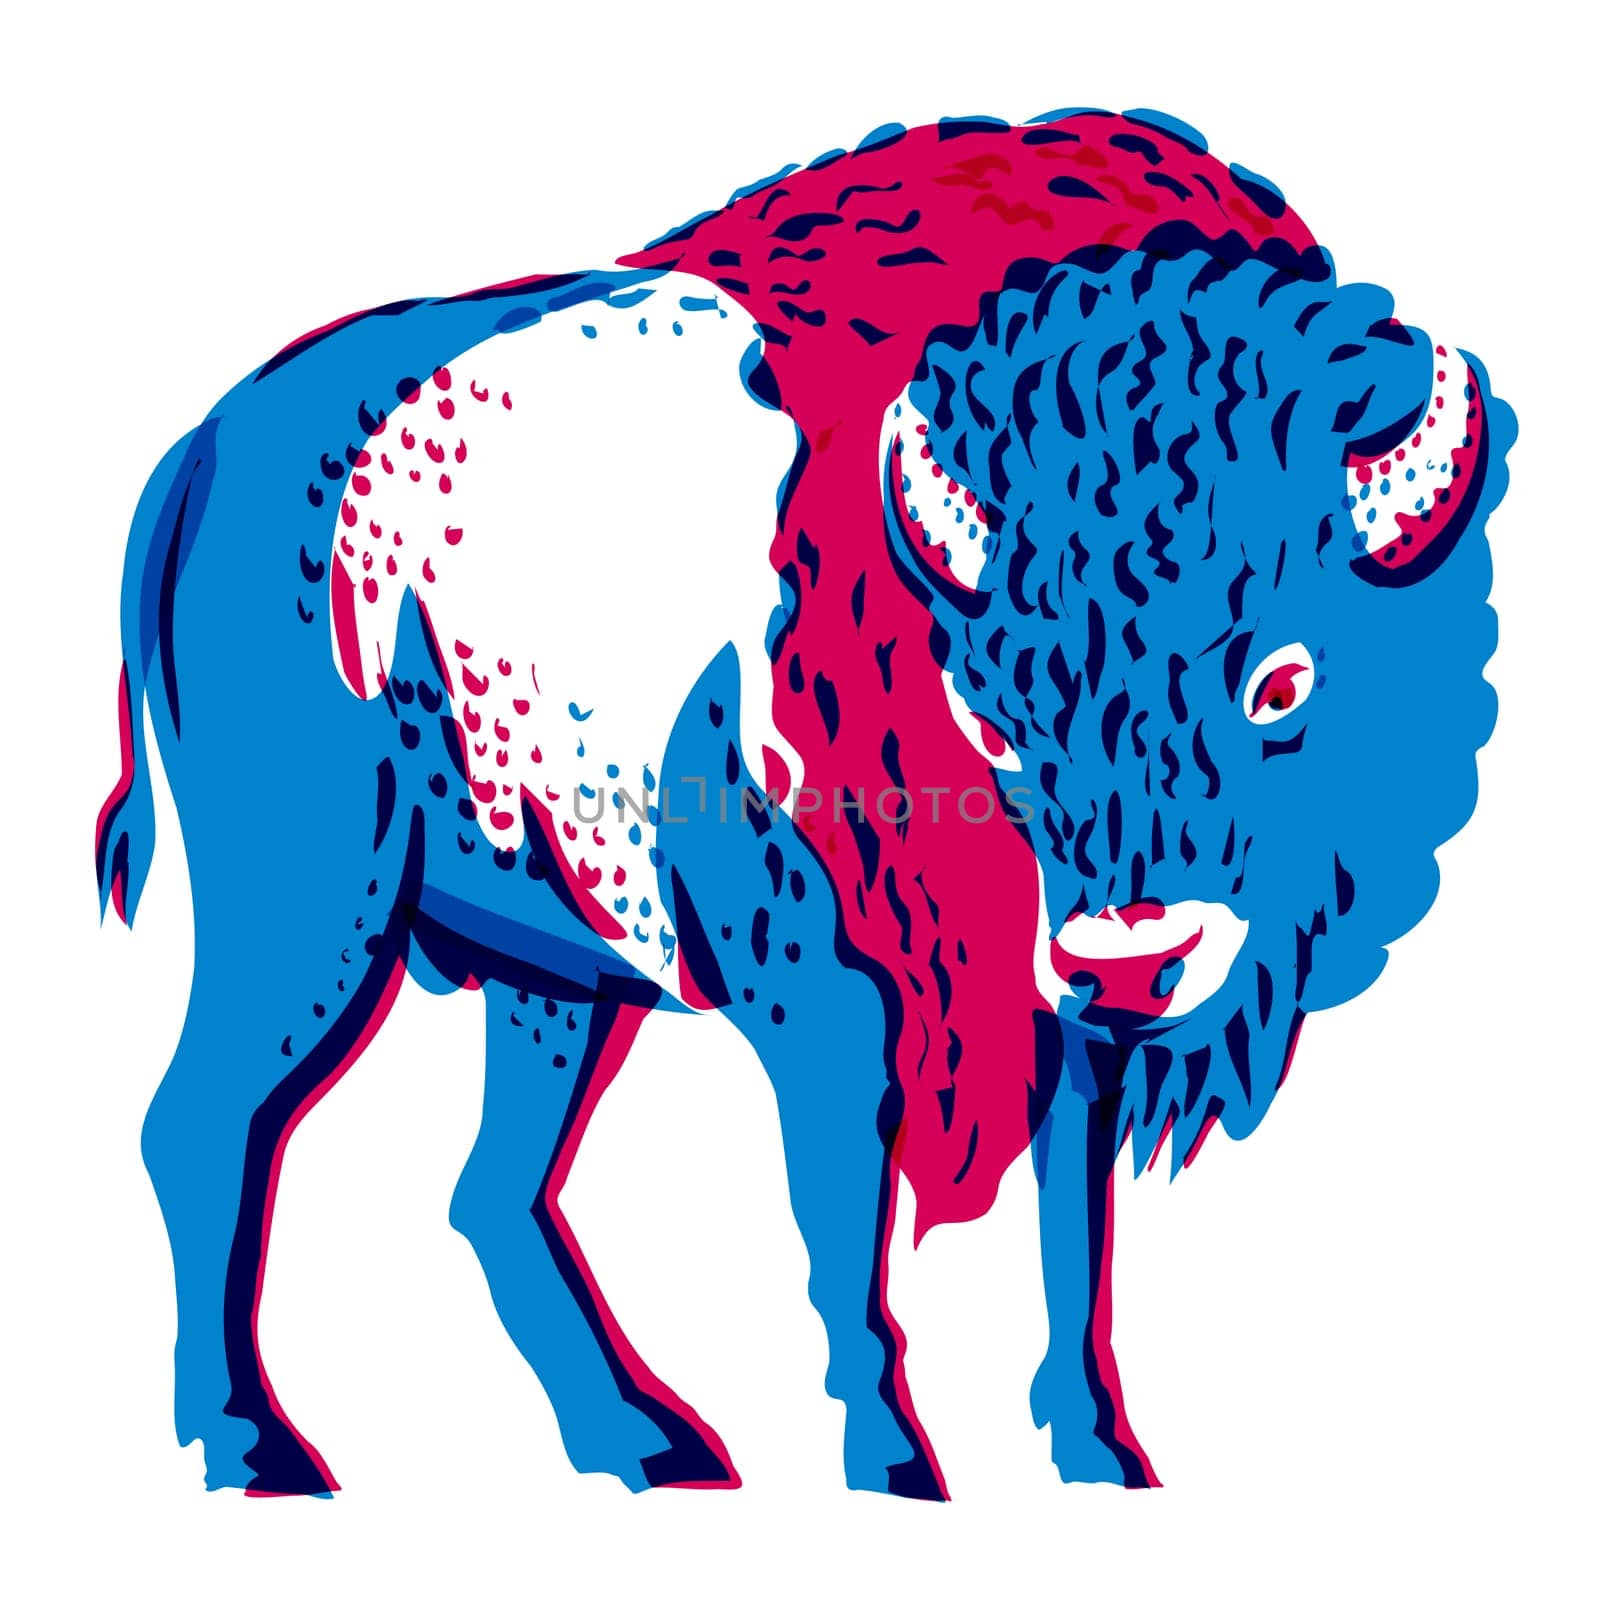 Risograph technique illustration of an American bison standing viewed from front done in retro riso effect digital screen printing style.
